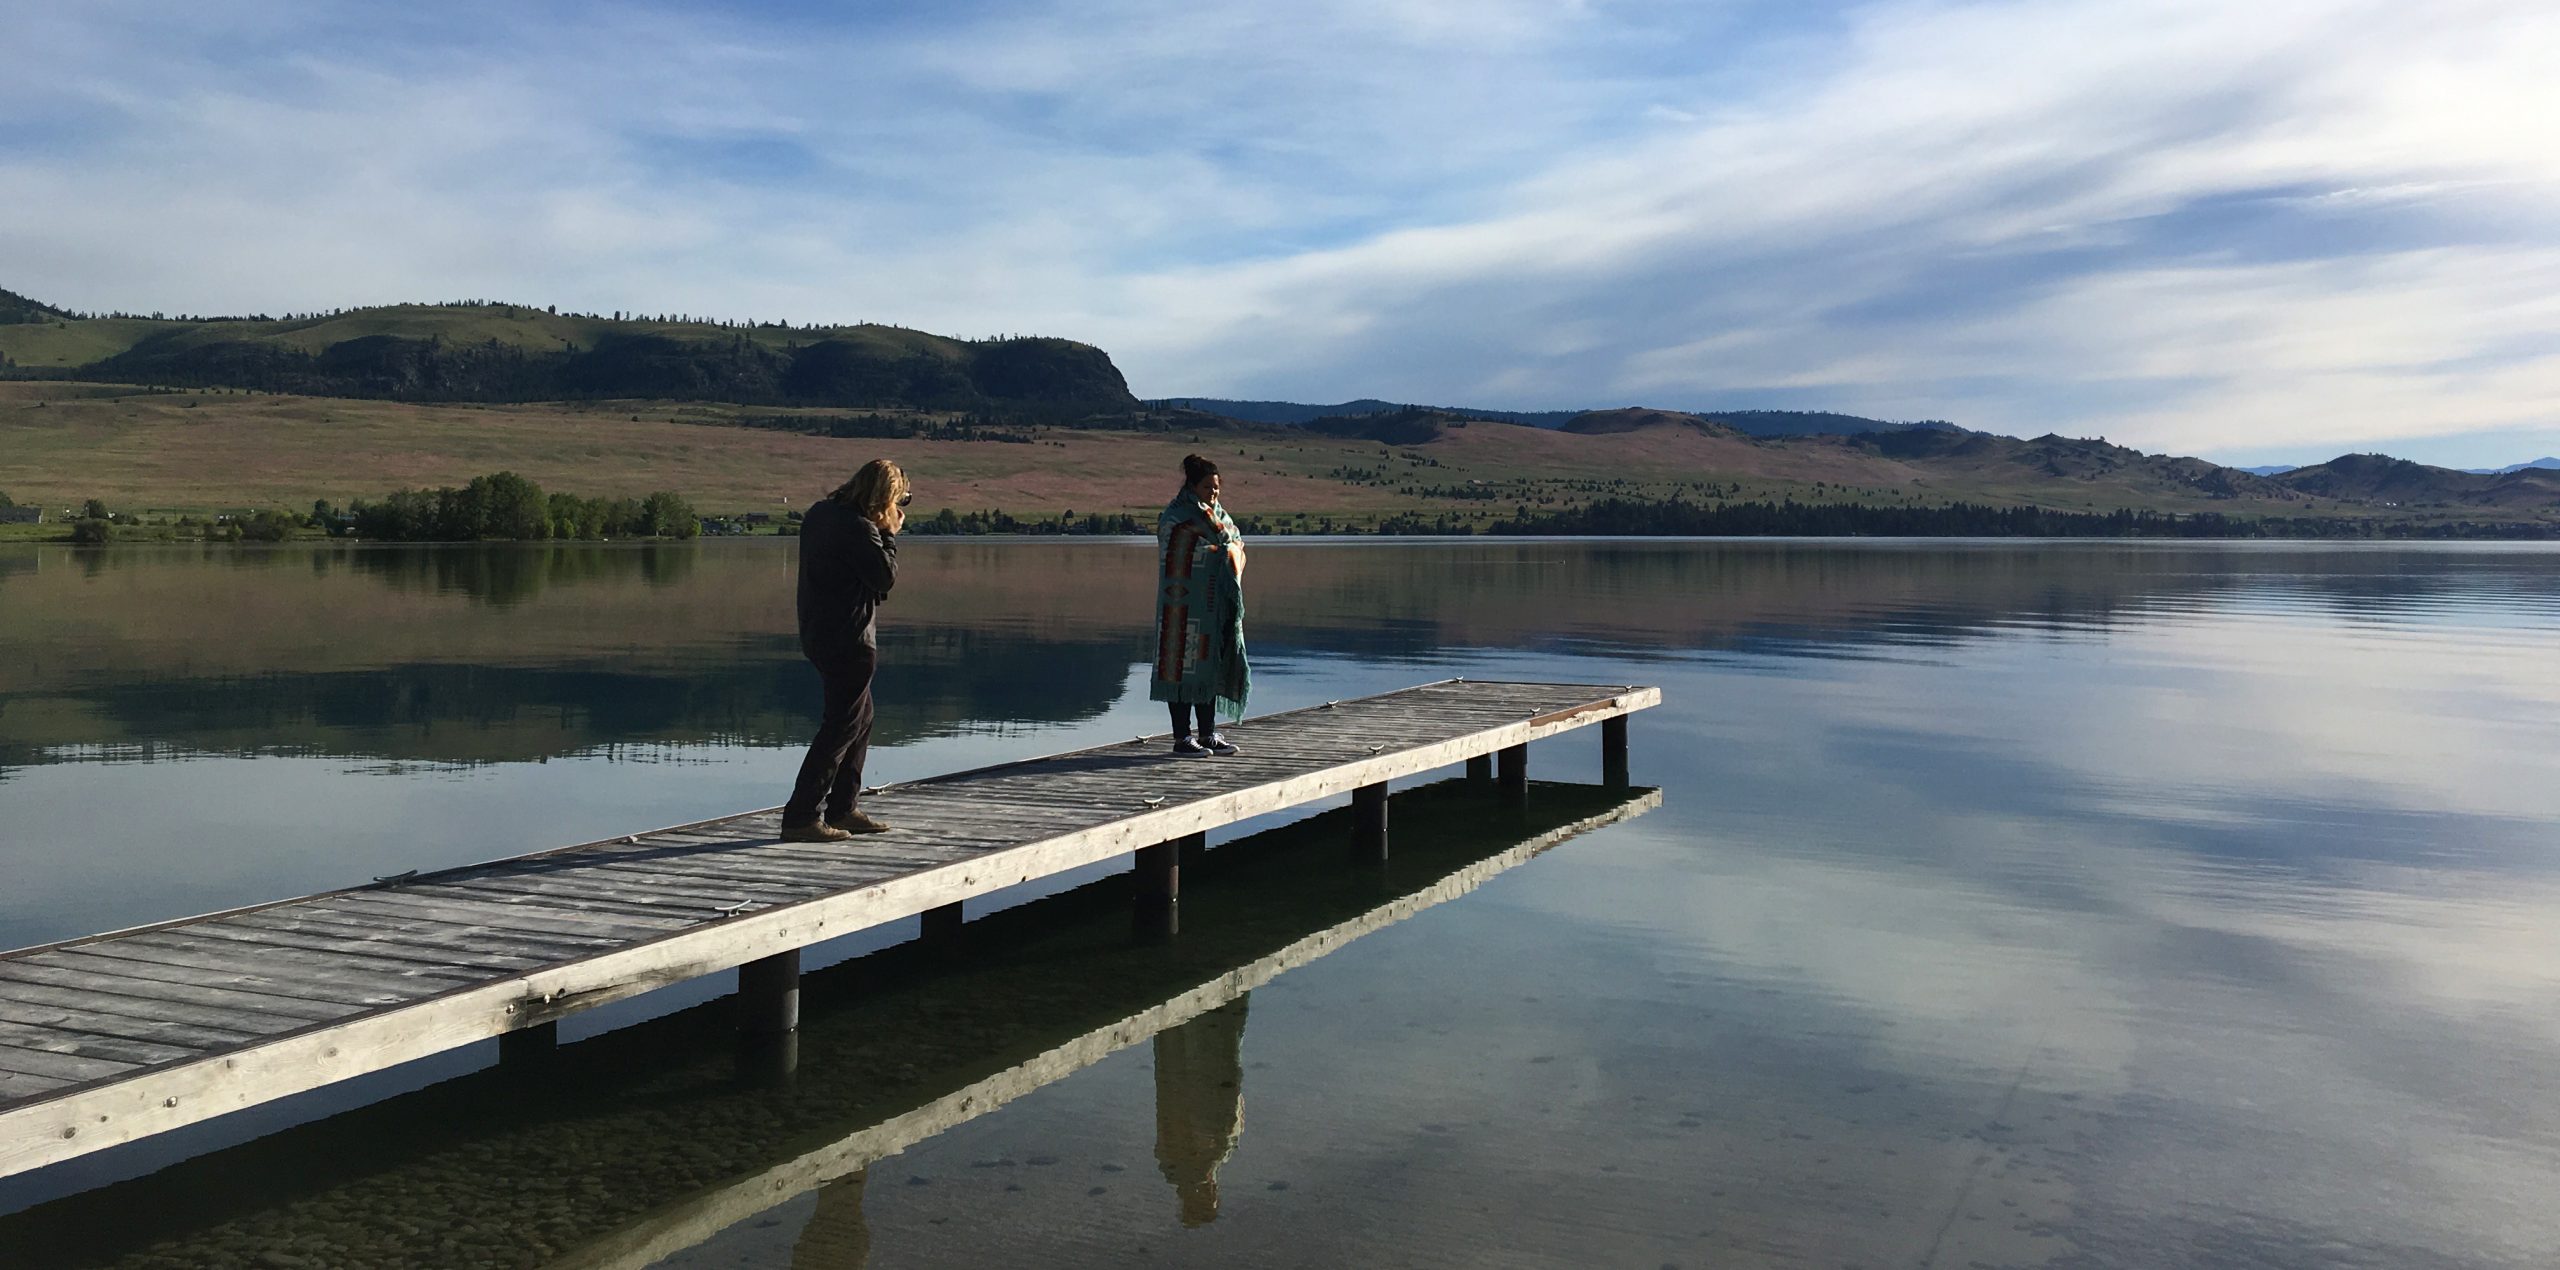 A College Fund photo shoot on location for the campaign by a lake on a dock.